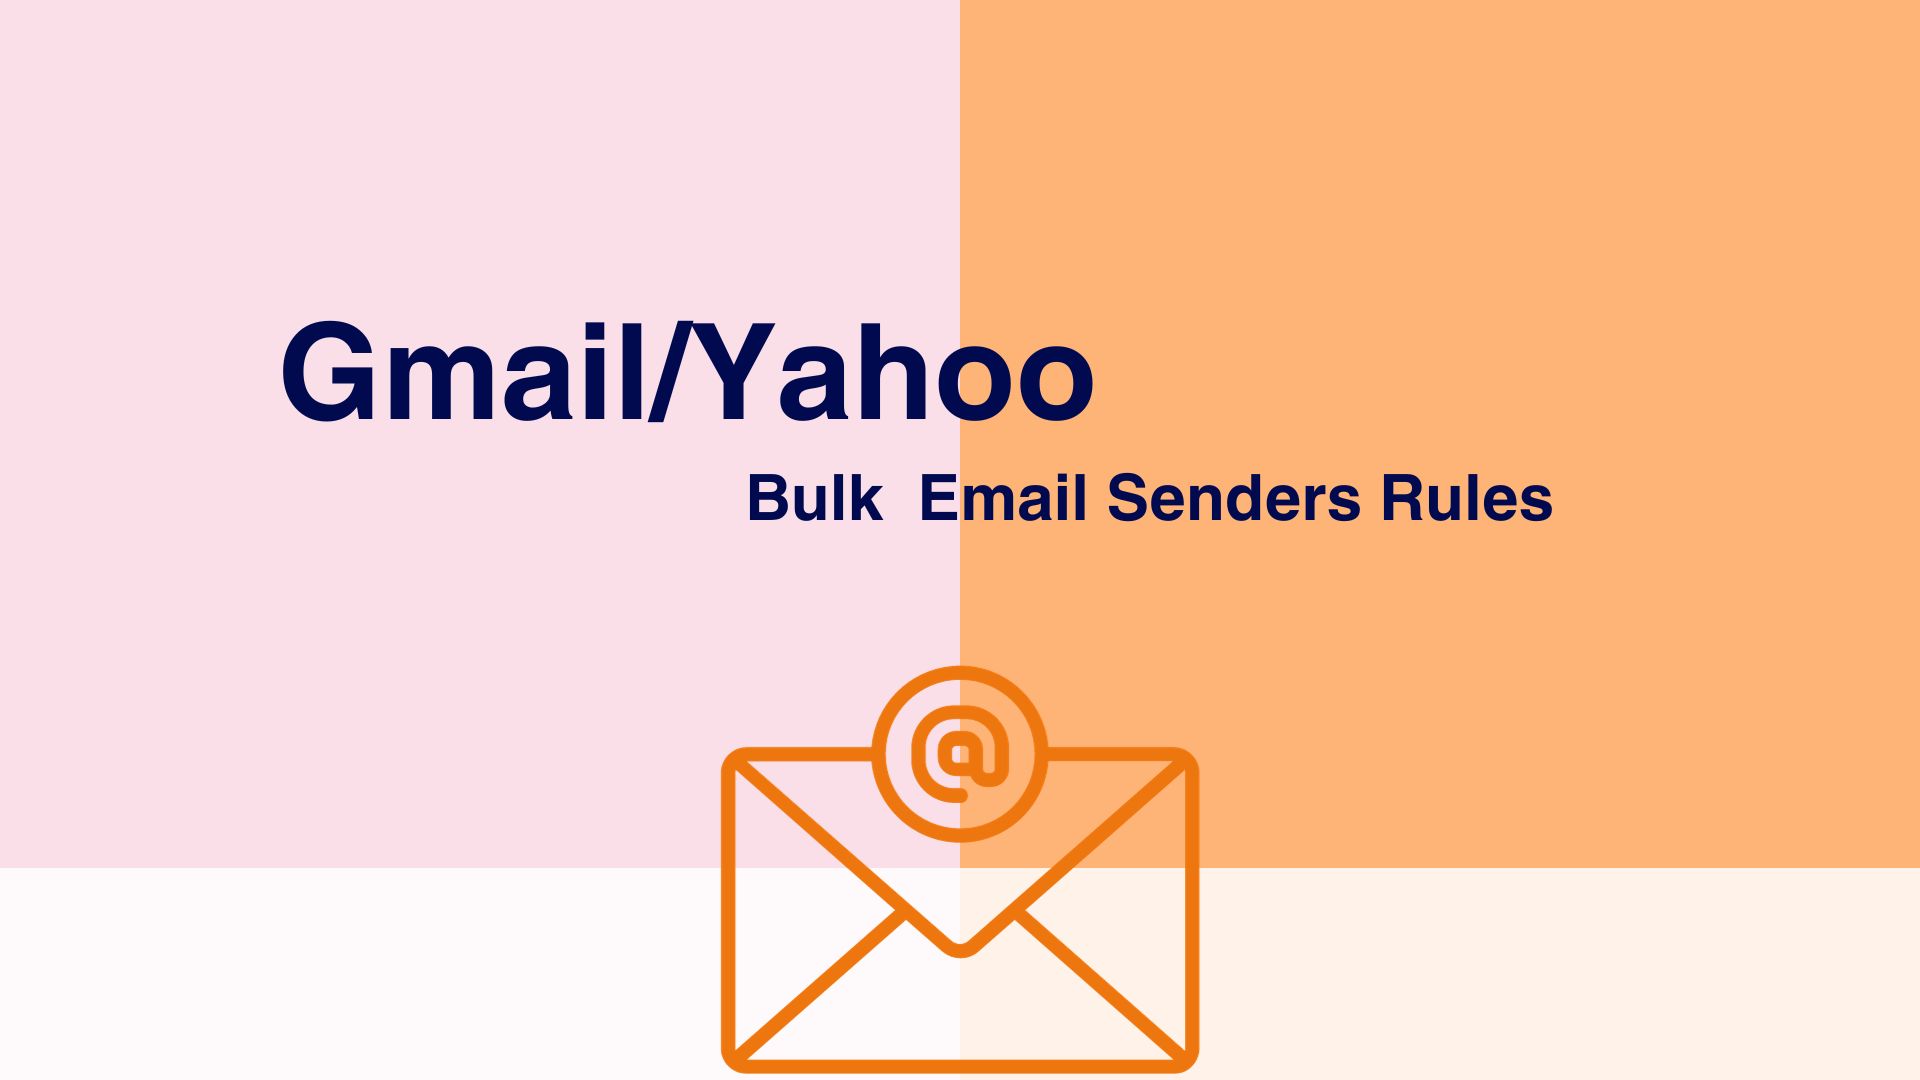 Aweber on Gmail/Yahoo bulk email senders requirements compliance